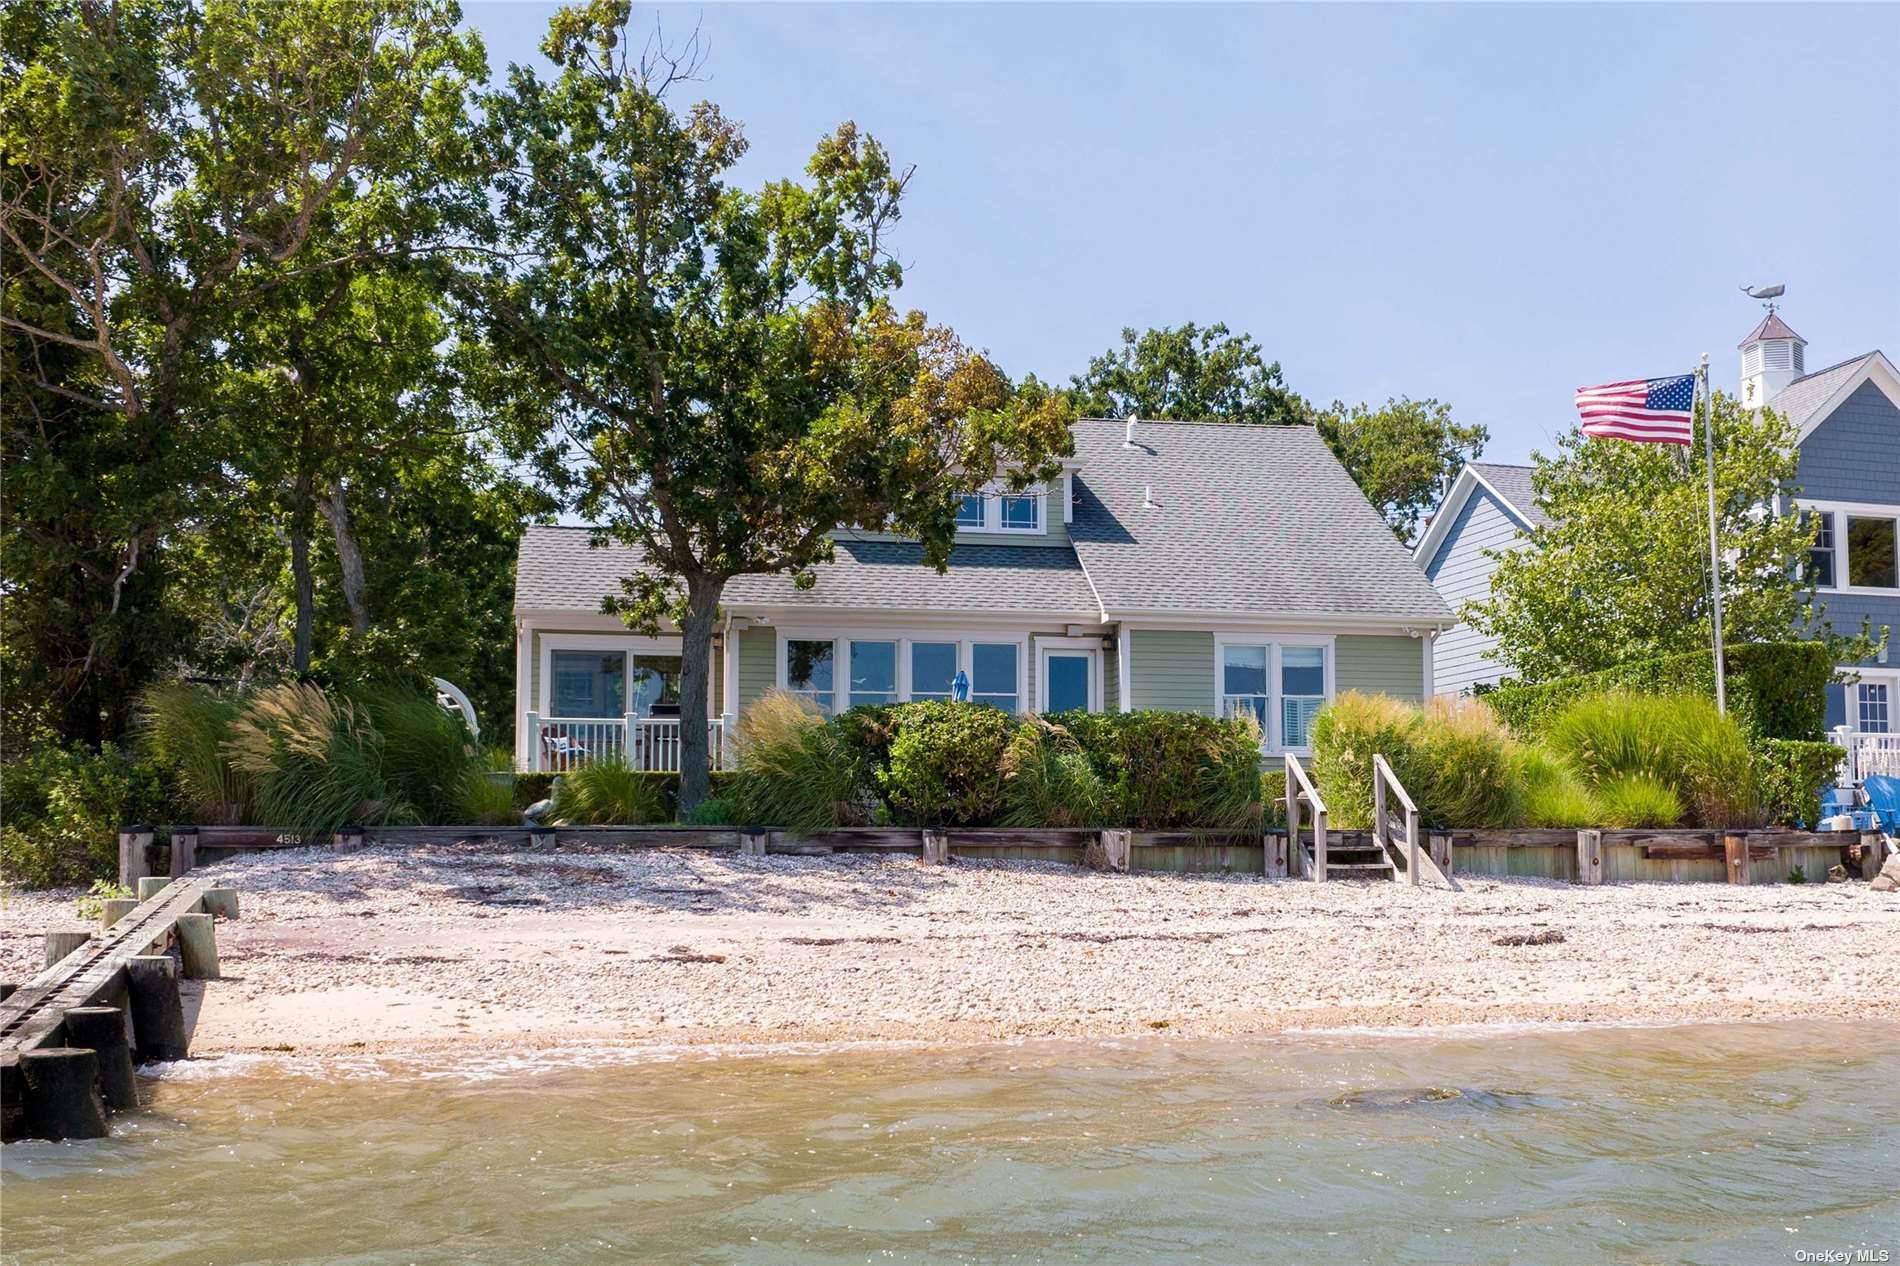 Nestled among the shores of Pipes Cove, this exquisite bayfront home offers the ultimate beach lifestyle, combining relaxation and panoramic views around Conkling Point over to Shelter Island.